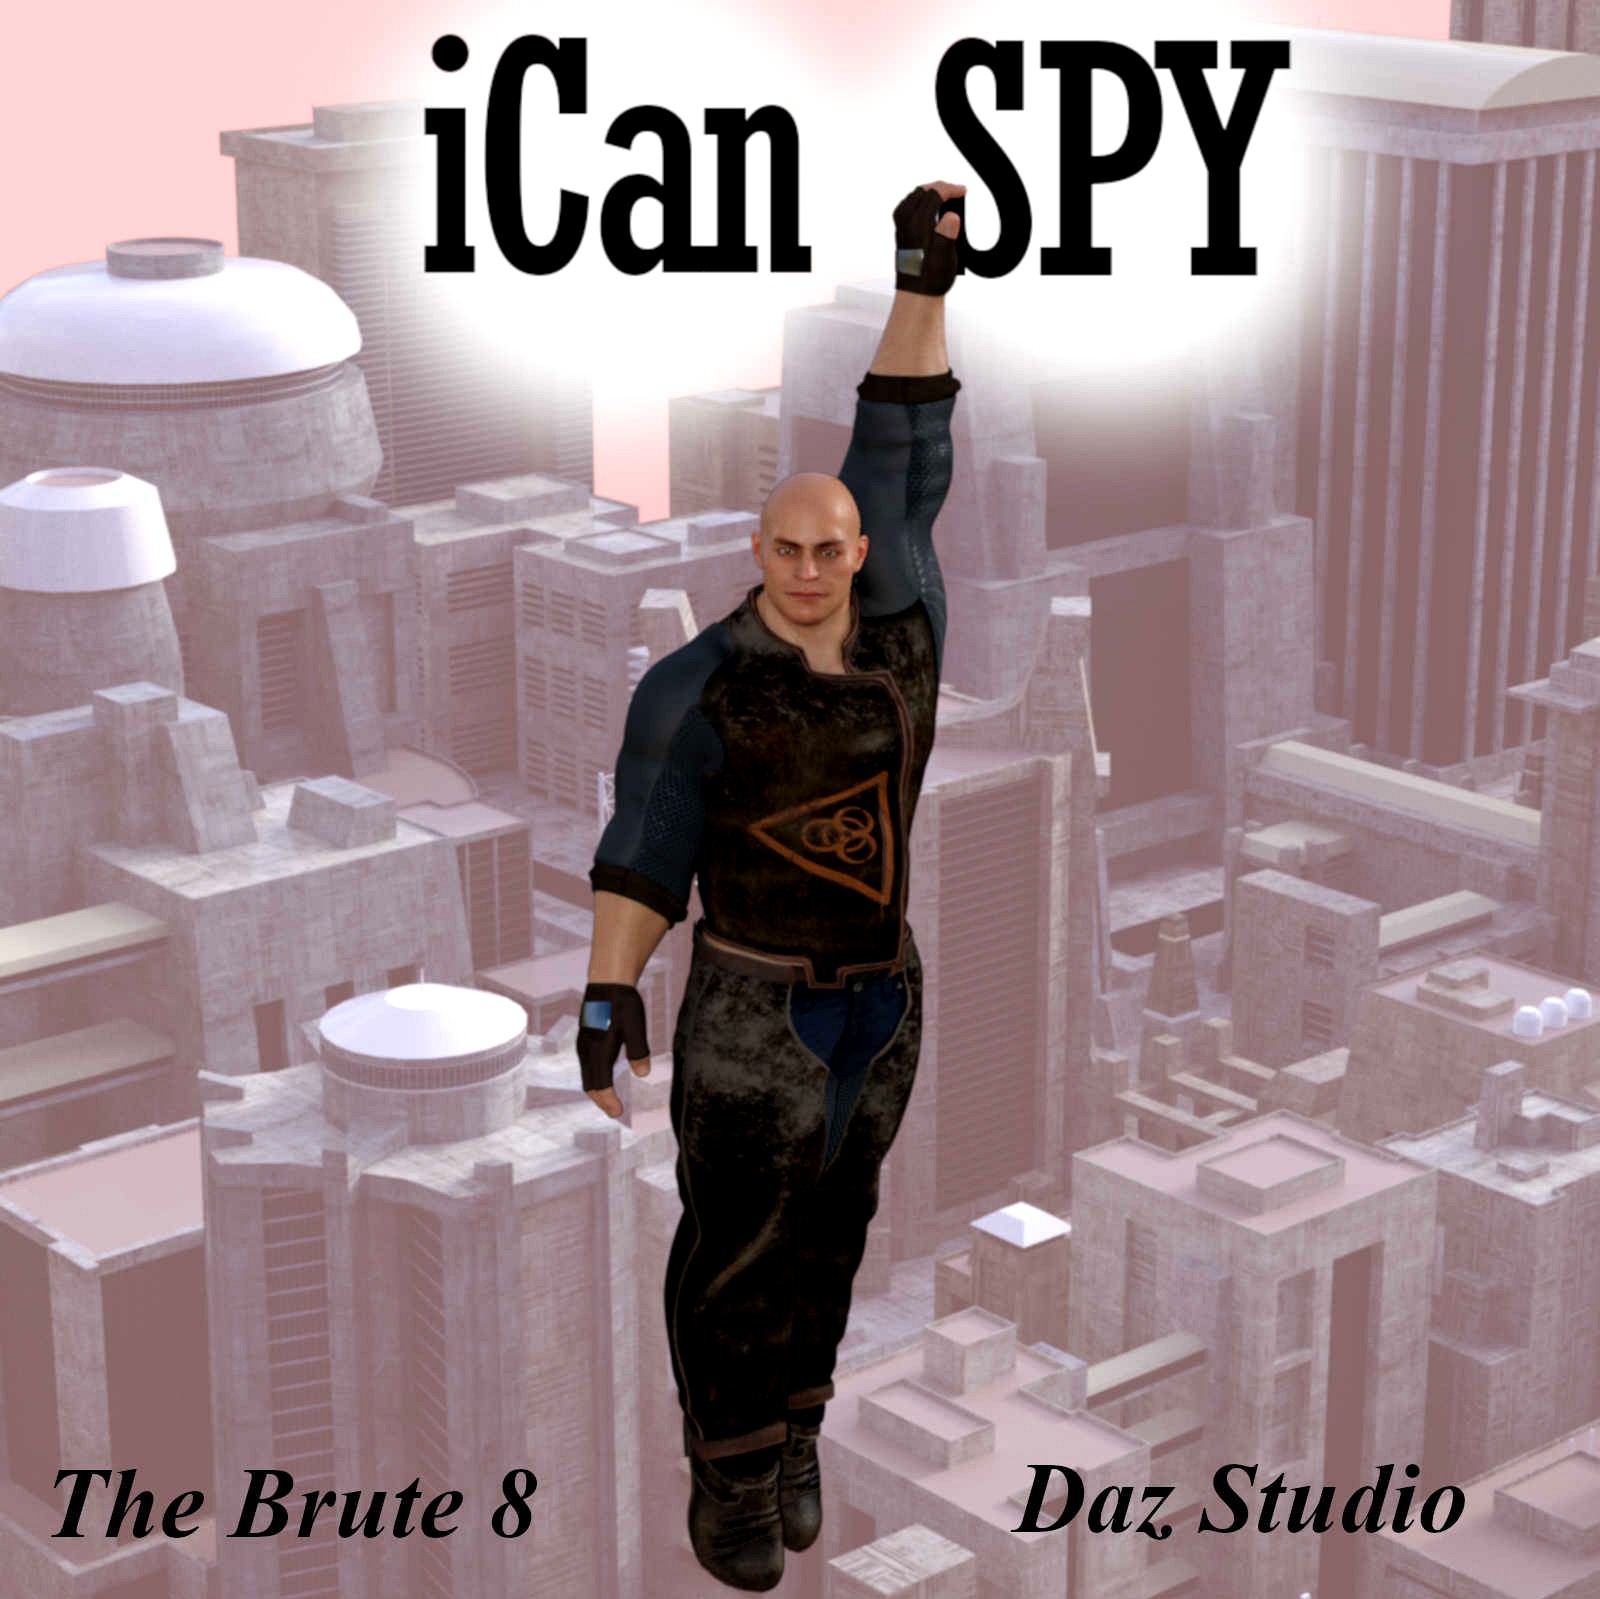 iCan SPY Poses for The Brute 8 (TB8) in Daz Studio